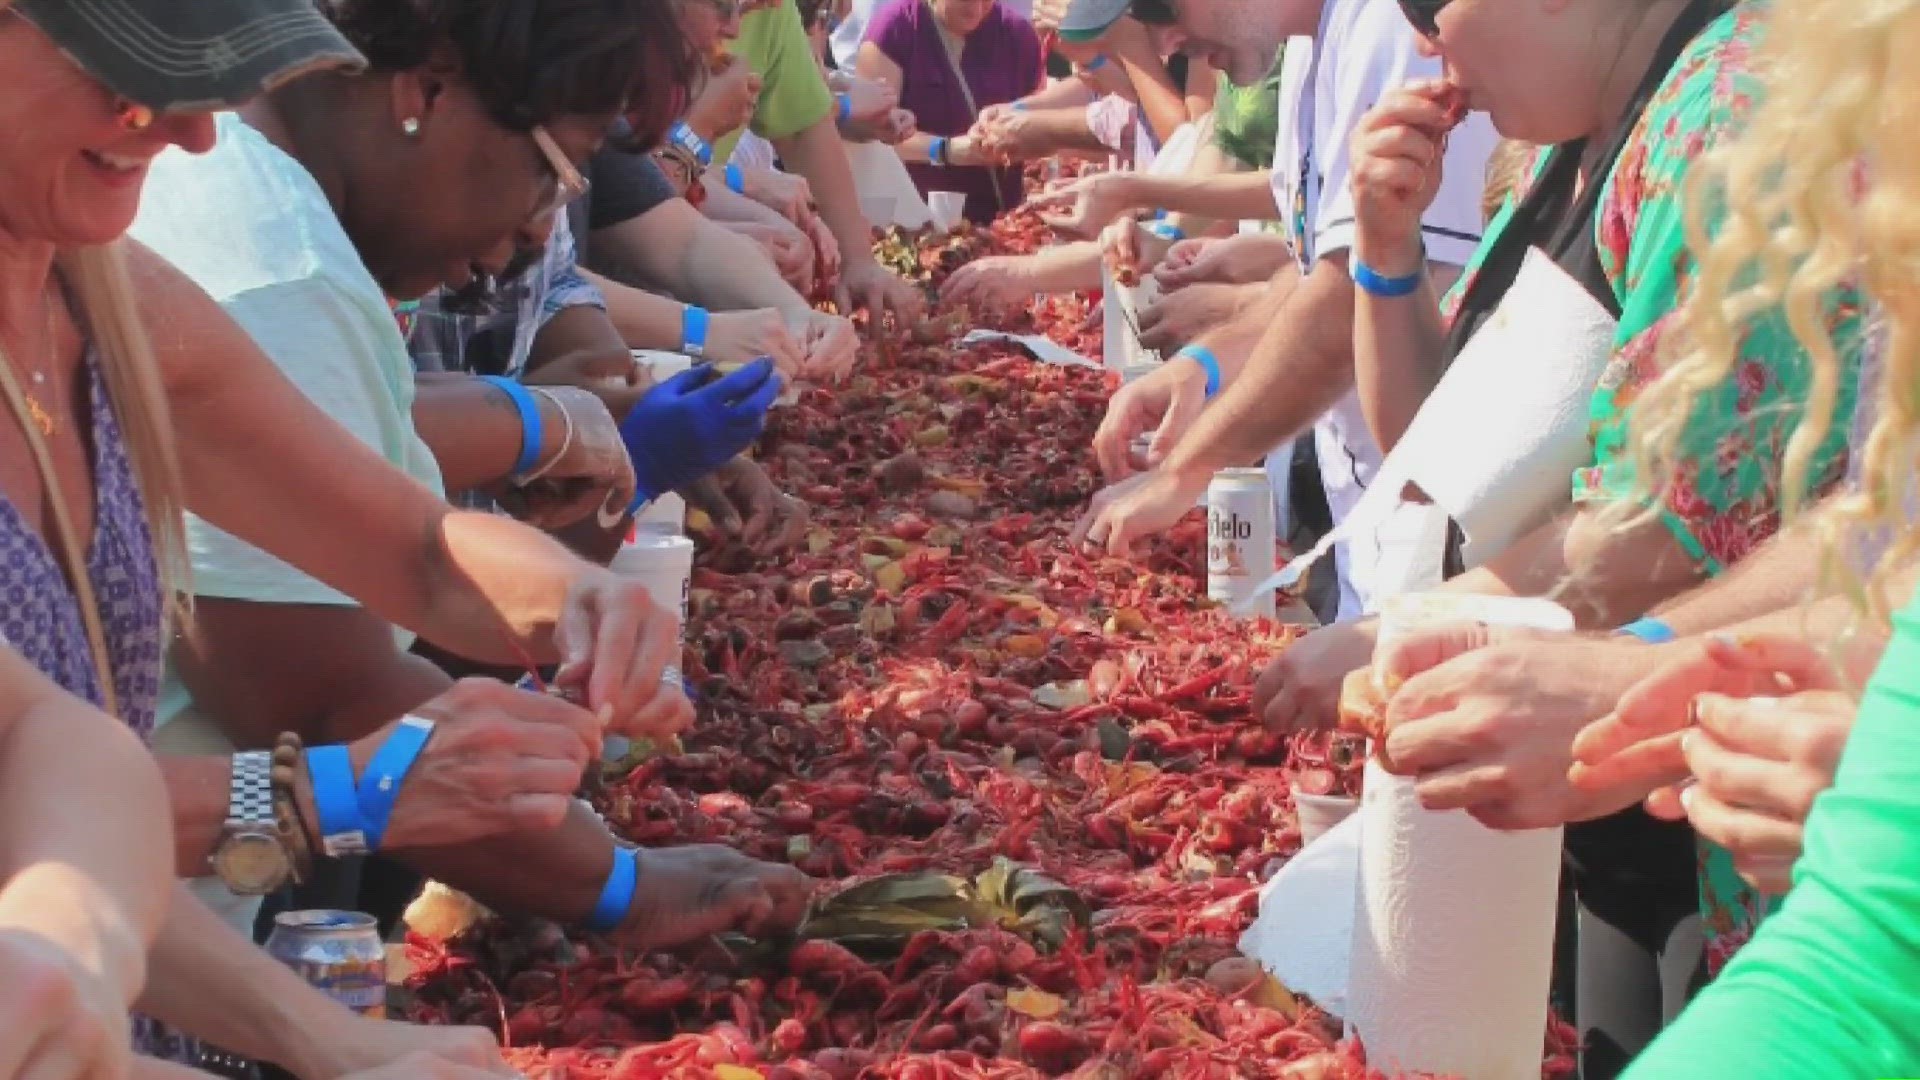 10 years after his death, Jamie Galloway's former roommate is honoring his legacy with a crawfish boil and block party for a good cause. Dave Jordan joins us.